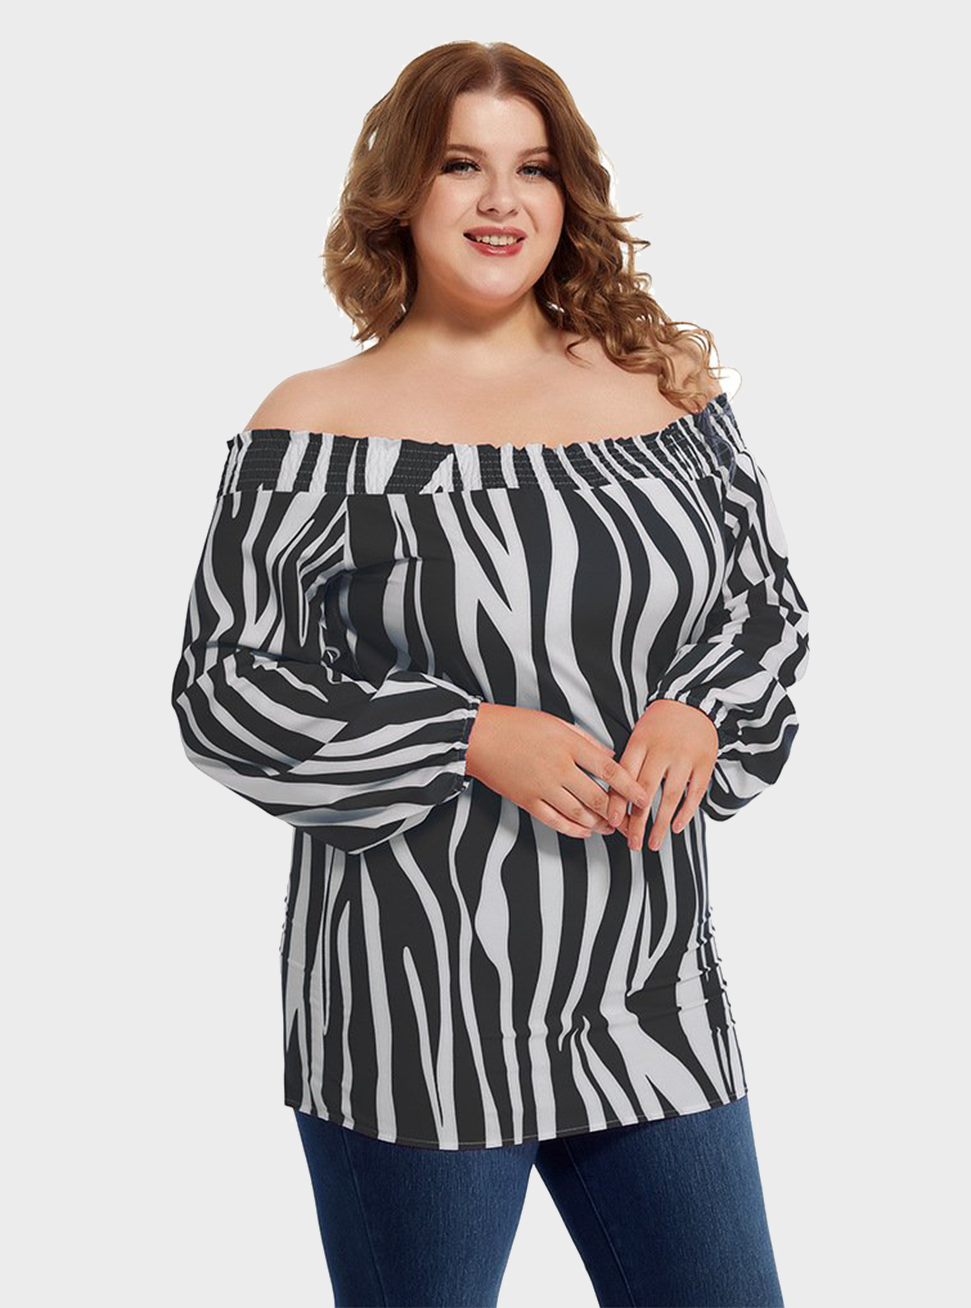 Plus Size One-line Neck And Leaky Shoulder Sexy T-shirt DMladies